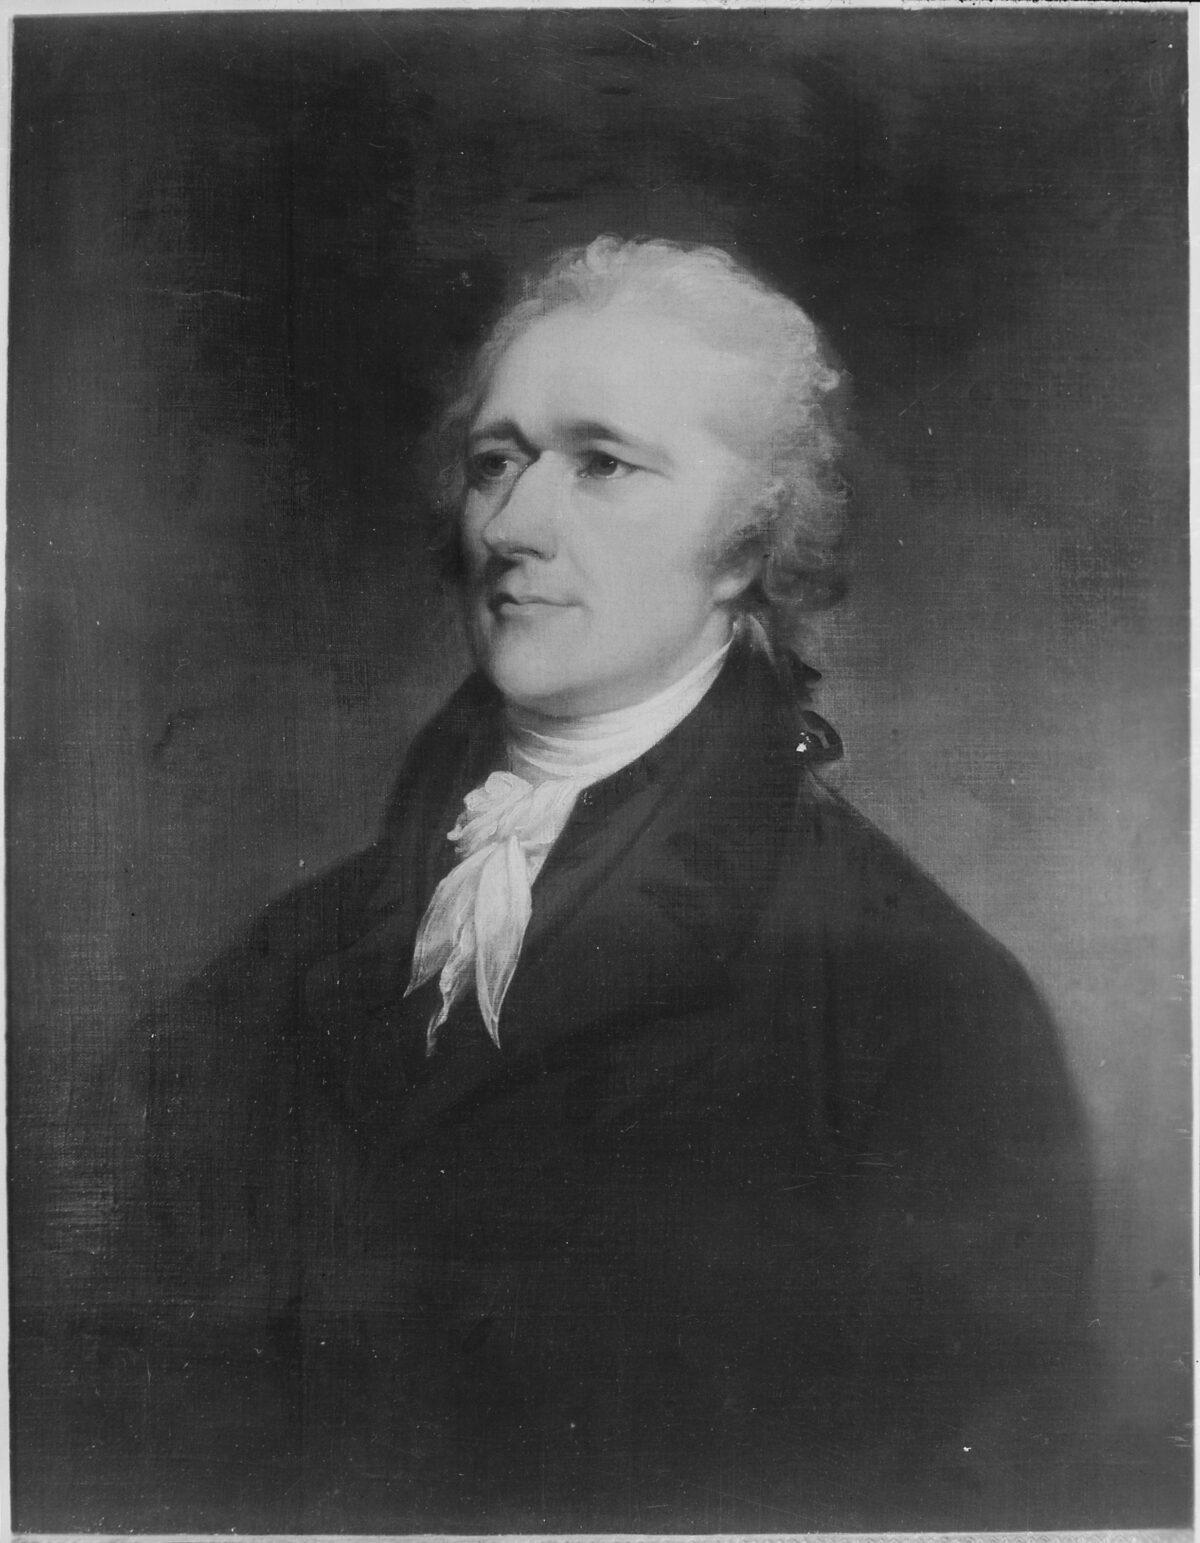 Alexander Hamilton, one of the Founding Fathers of the United States. (U.S. National Archives and Records Administration)